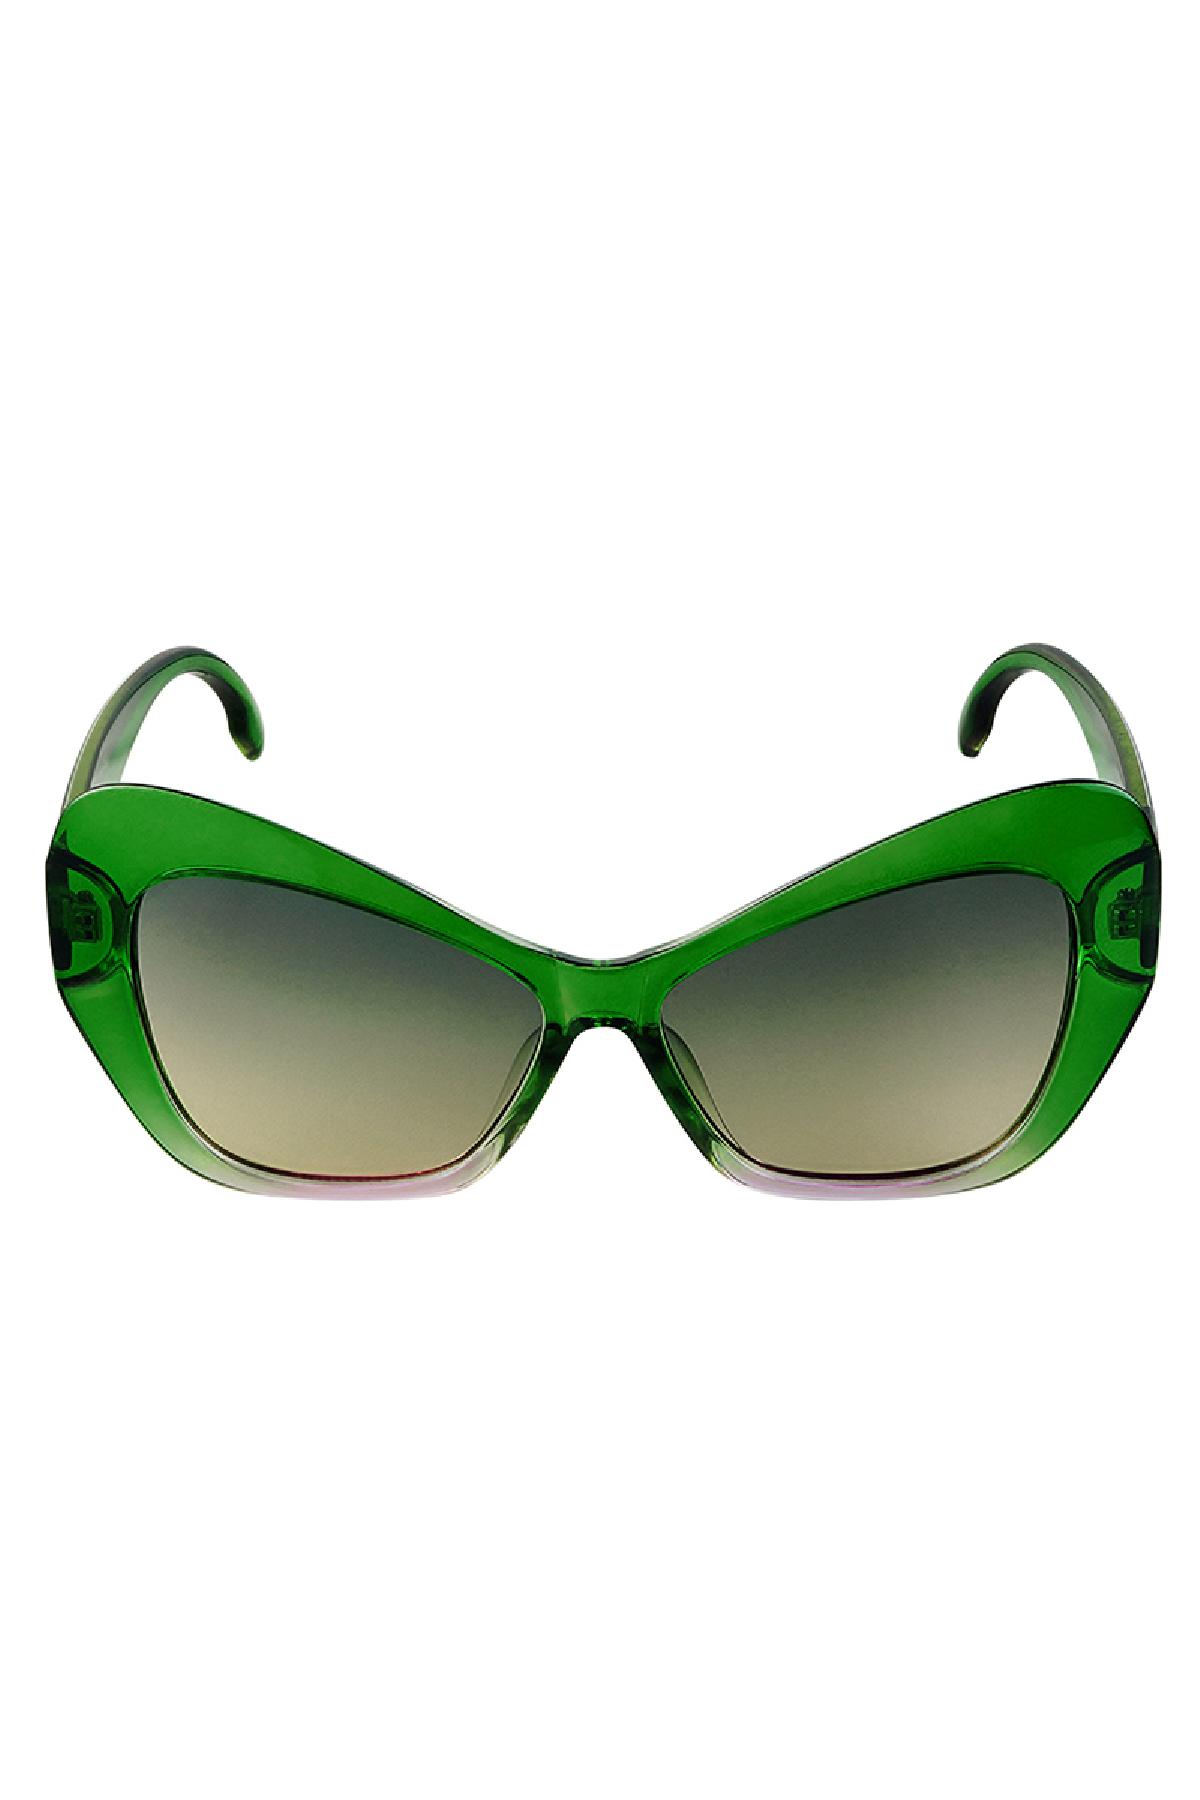 Sunglasses statement Green PC One size Picture3